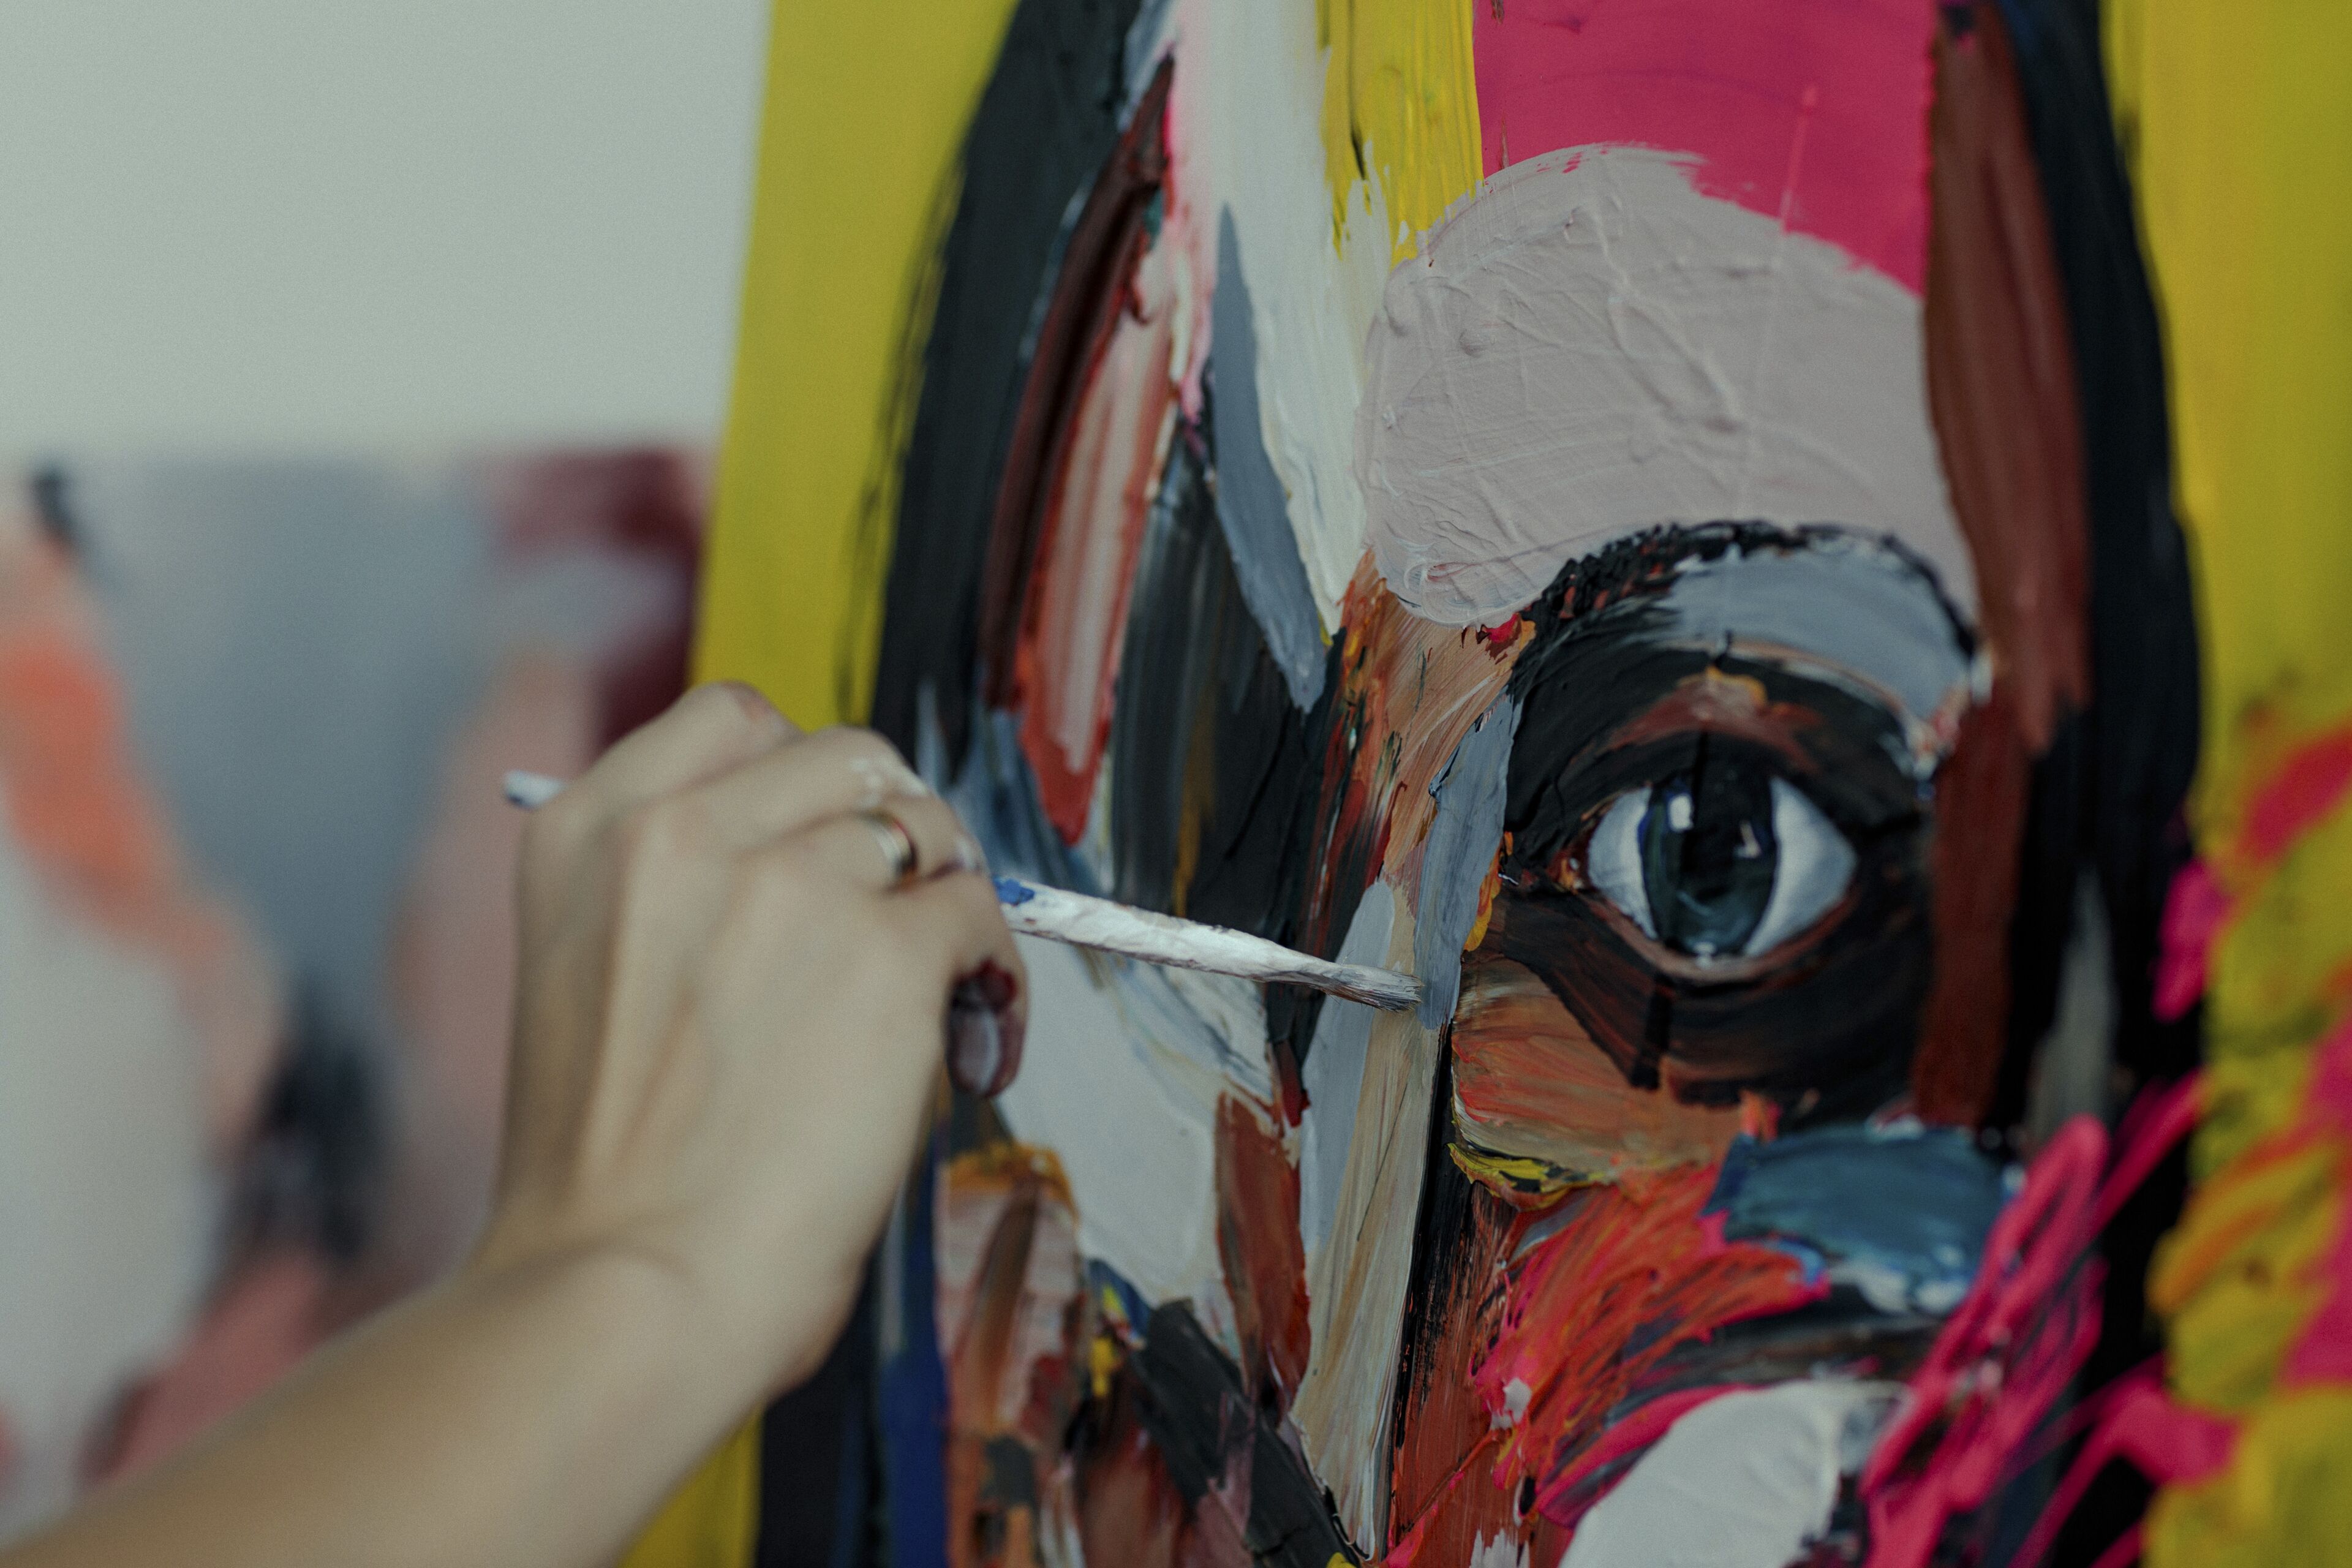 An artist's hand applying vibrant oil paints to a canvas, focusing on an eye detail.